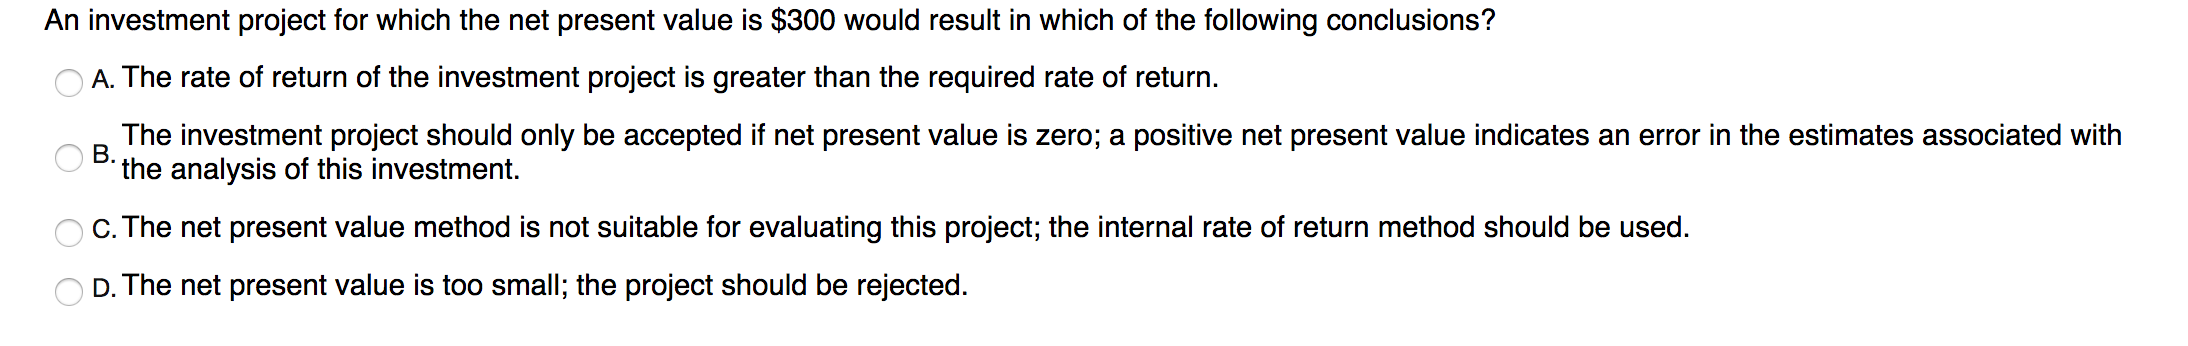 An investment project for which the net present value is $300 would result in which of the following conclusions?
A. The rate of return of the investment project is greater than the required rate of return.
The investment project should only be accepted if net present value is zero; a positive net present value indicates an error in the estimates associated with
B.
the analysis of this investment.
C. The net present value method is not suitable for evaluating this project; the internal rate of return method should be used.
D. The net present value is too small; the project should be rejected.
